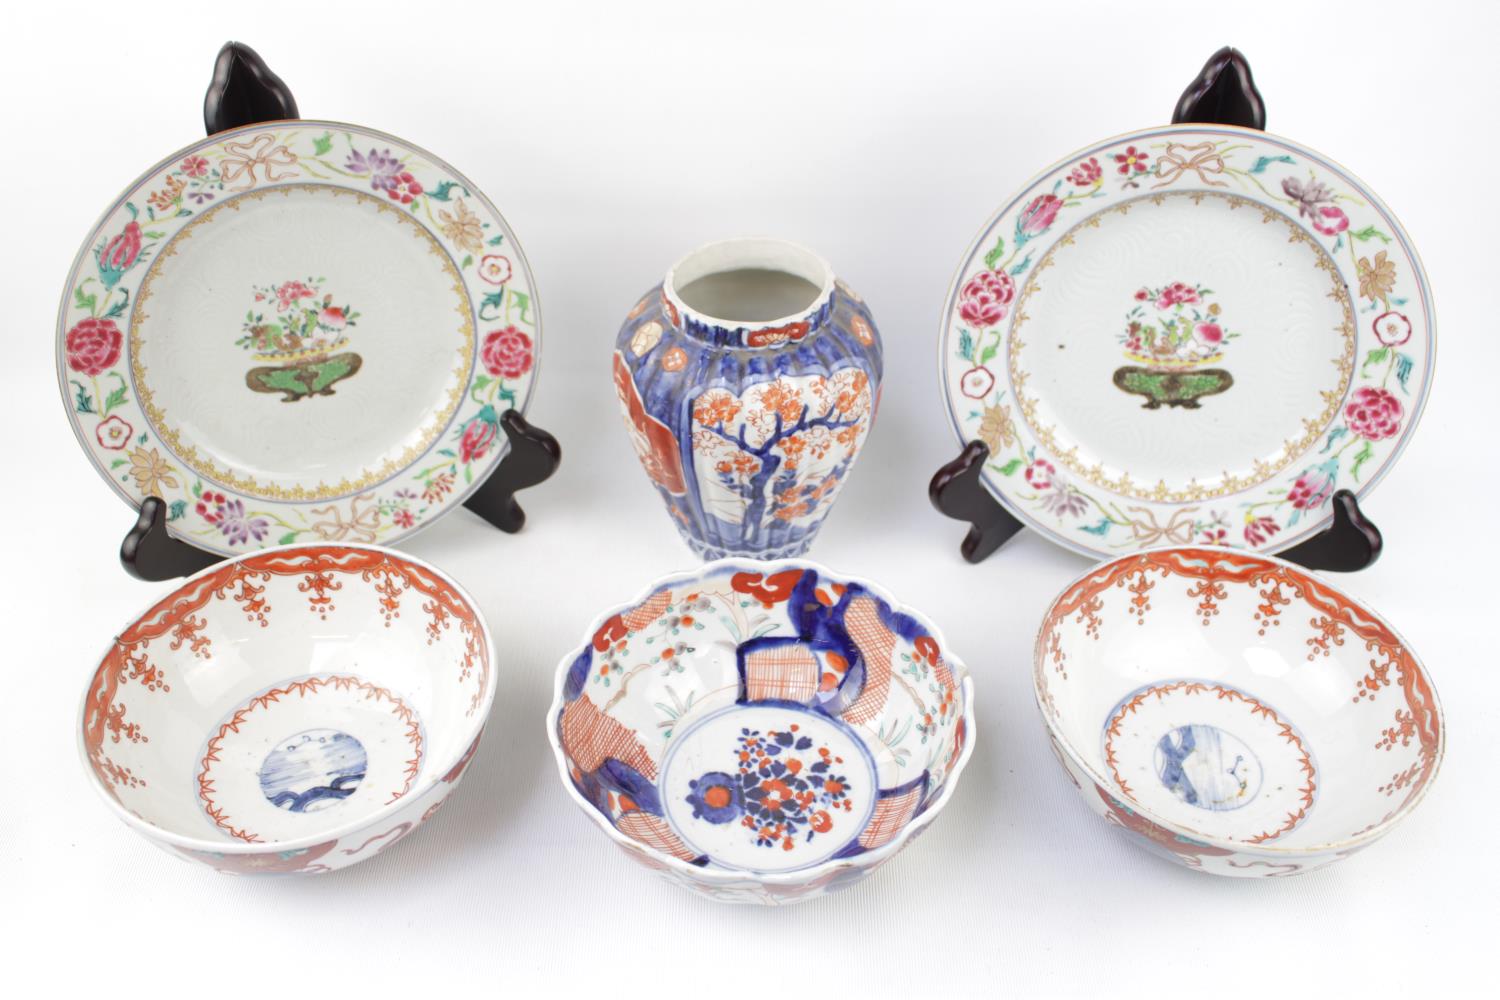 Pair of 18thC Chinese floral decorated plates, Pair of Red ground bowls with Orb medallions,